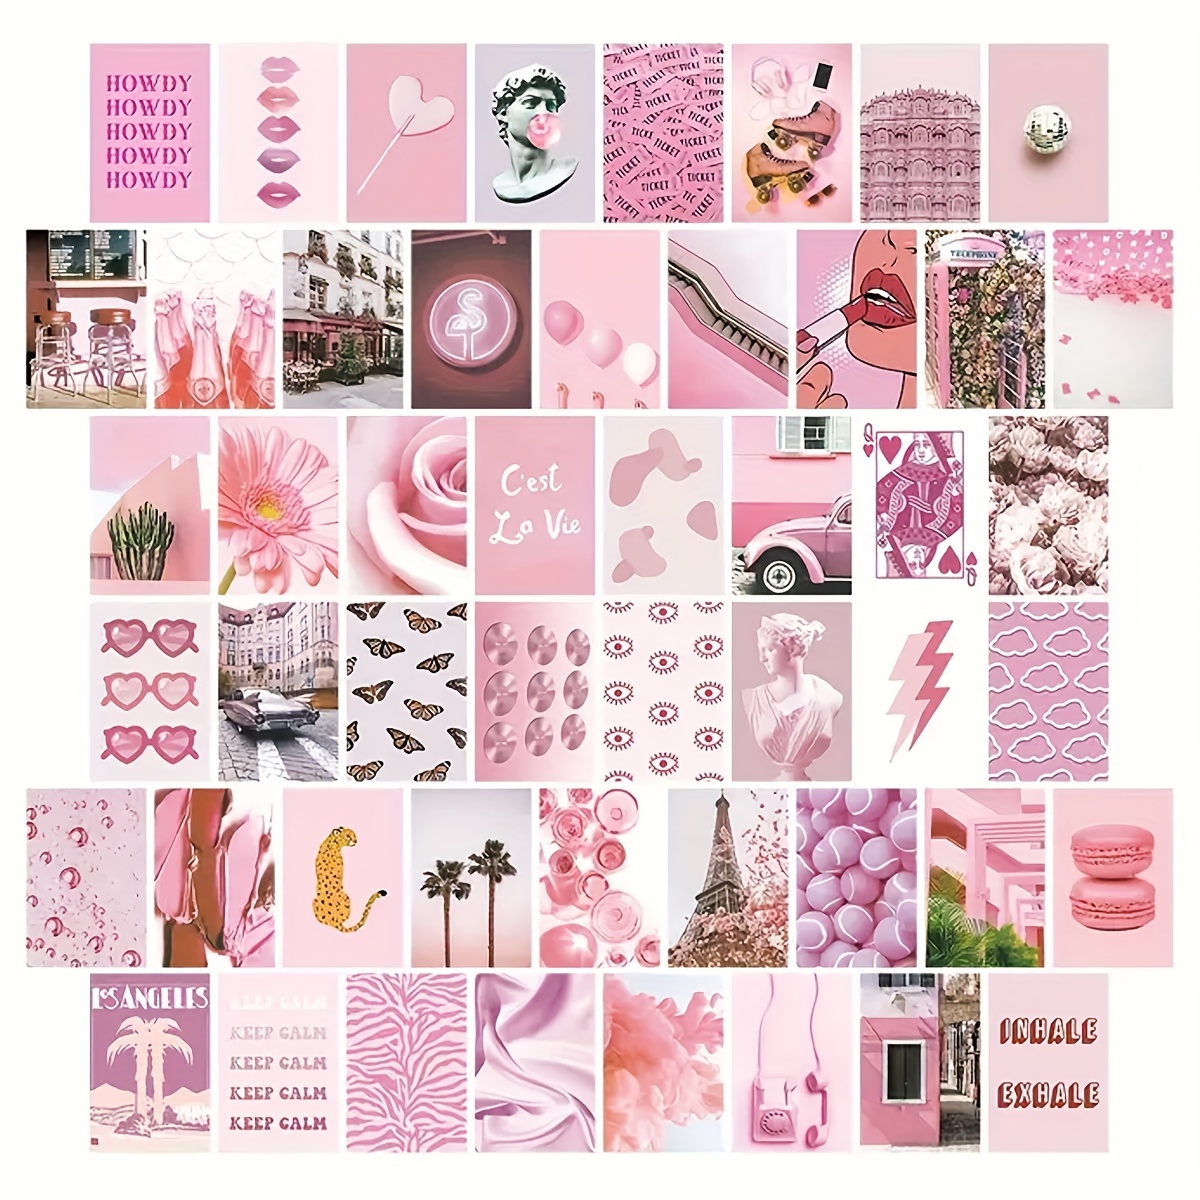 Aesthetic Room Décor for Teen Girls DIY Wall Collage Kit Arts and